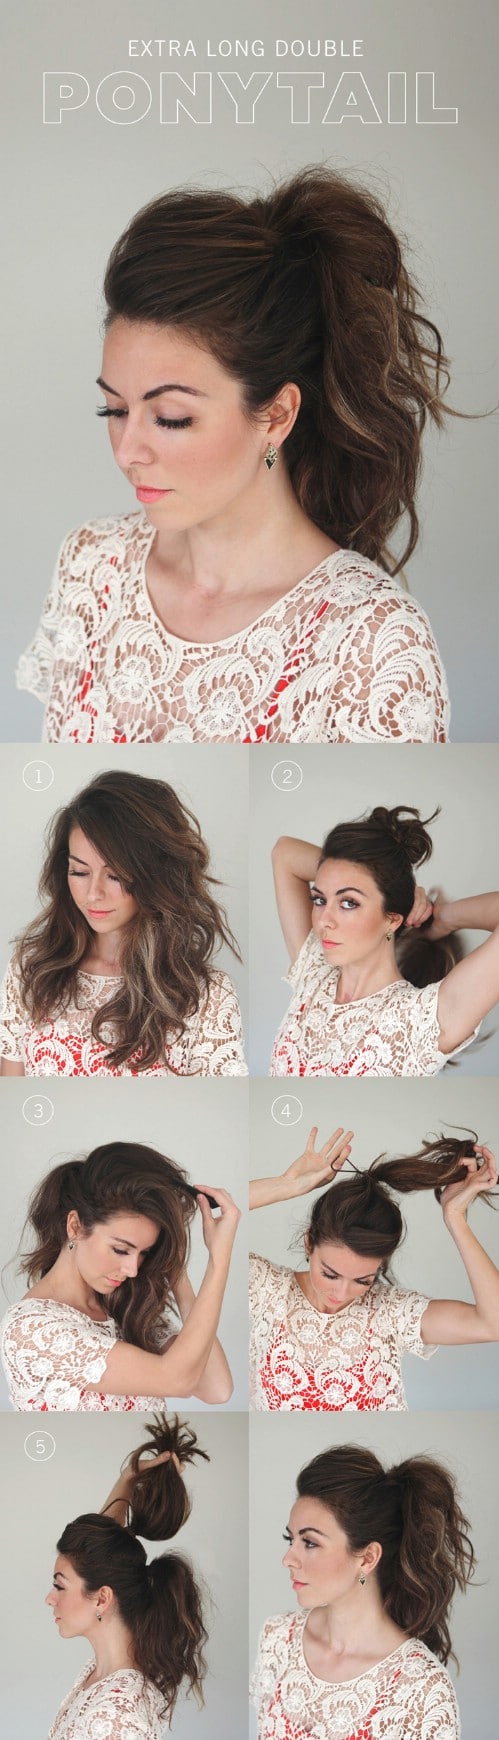 20 Perfect Ponytail Tutorials – Turning the Ordinary Into ...